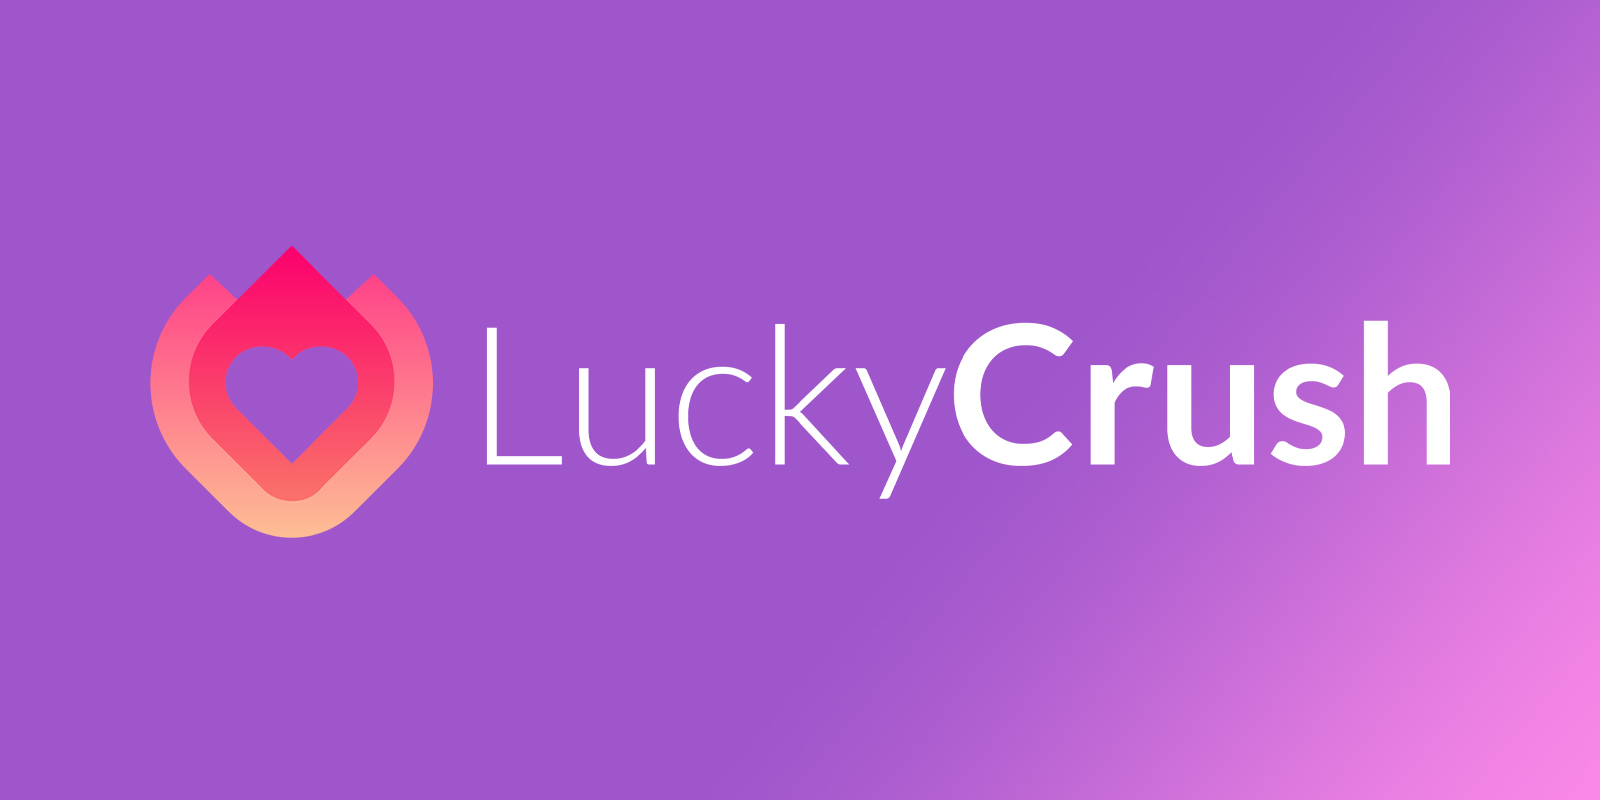 Luckycrush unlimited time apk